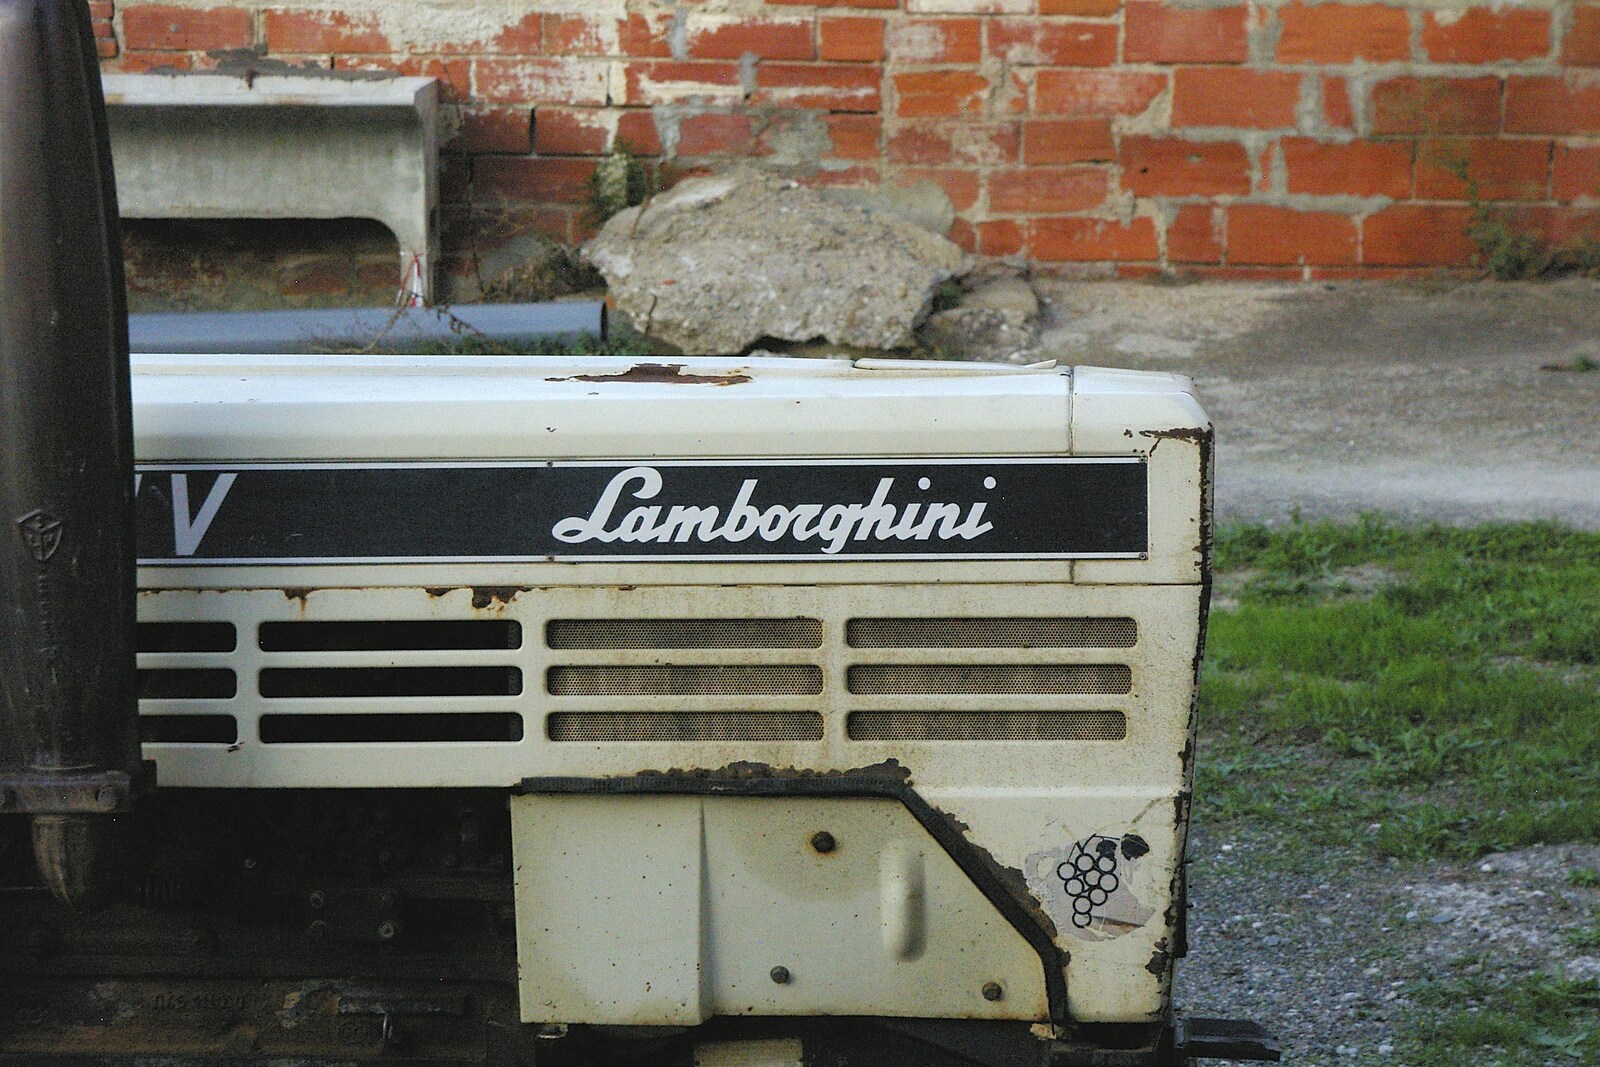 It's an actual Lamborghini tractor from Grape Picking and Pressing, Roussillon, France - 19th September 2006